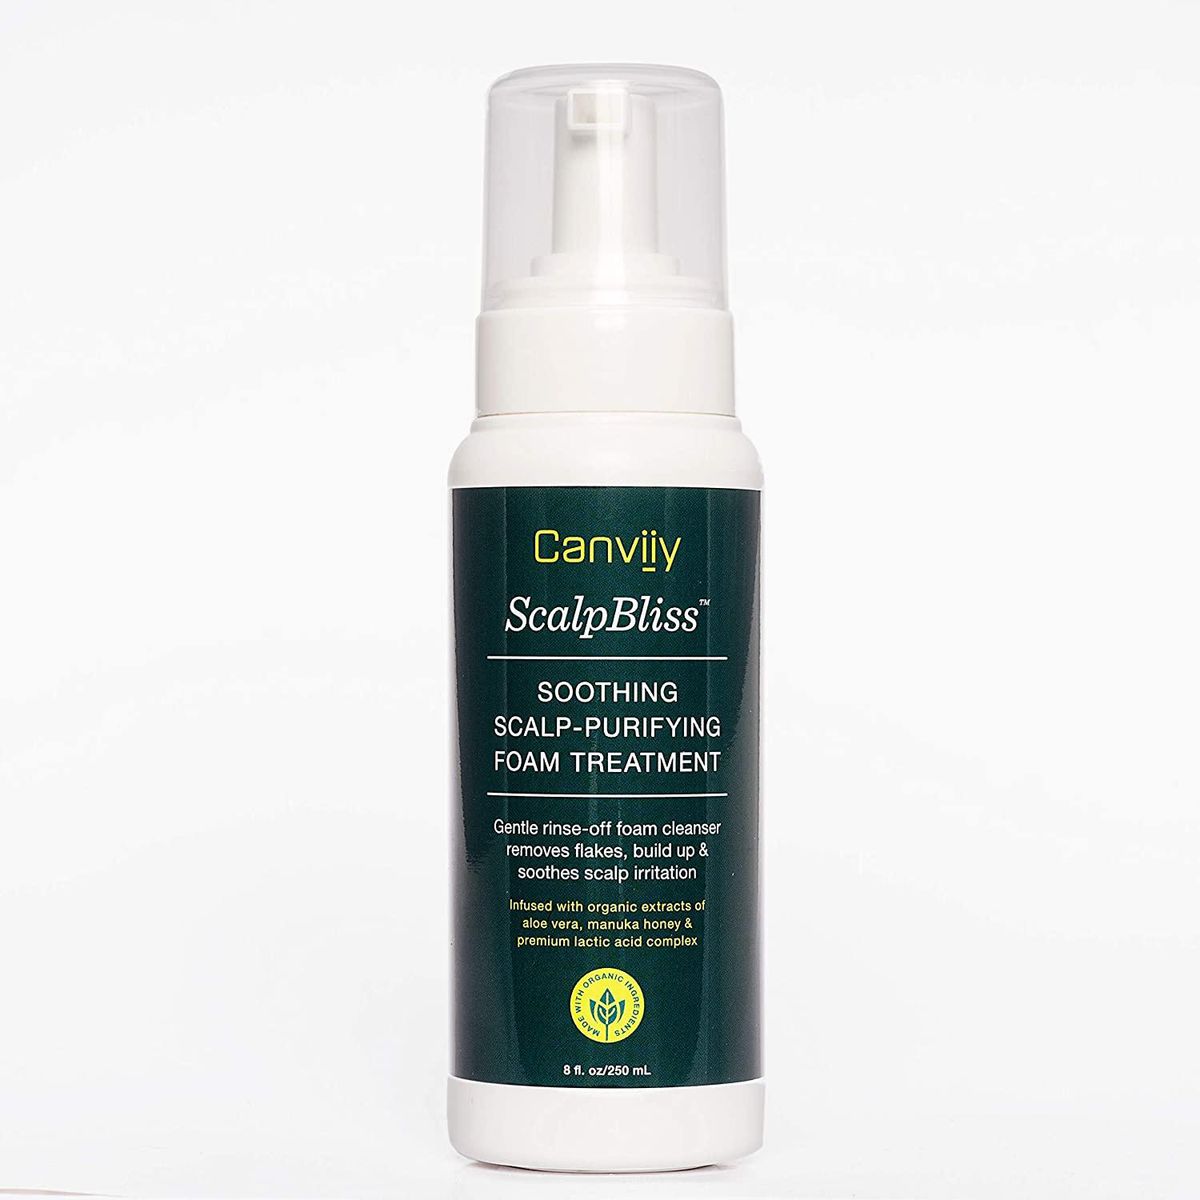 ScalpBliss Soothing Scalp Purifying Foam Treatment